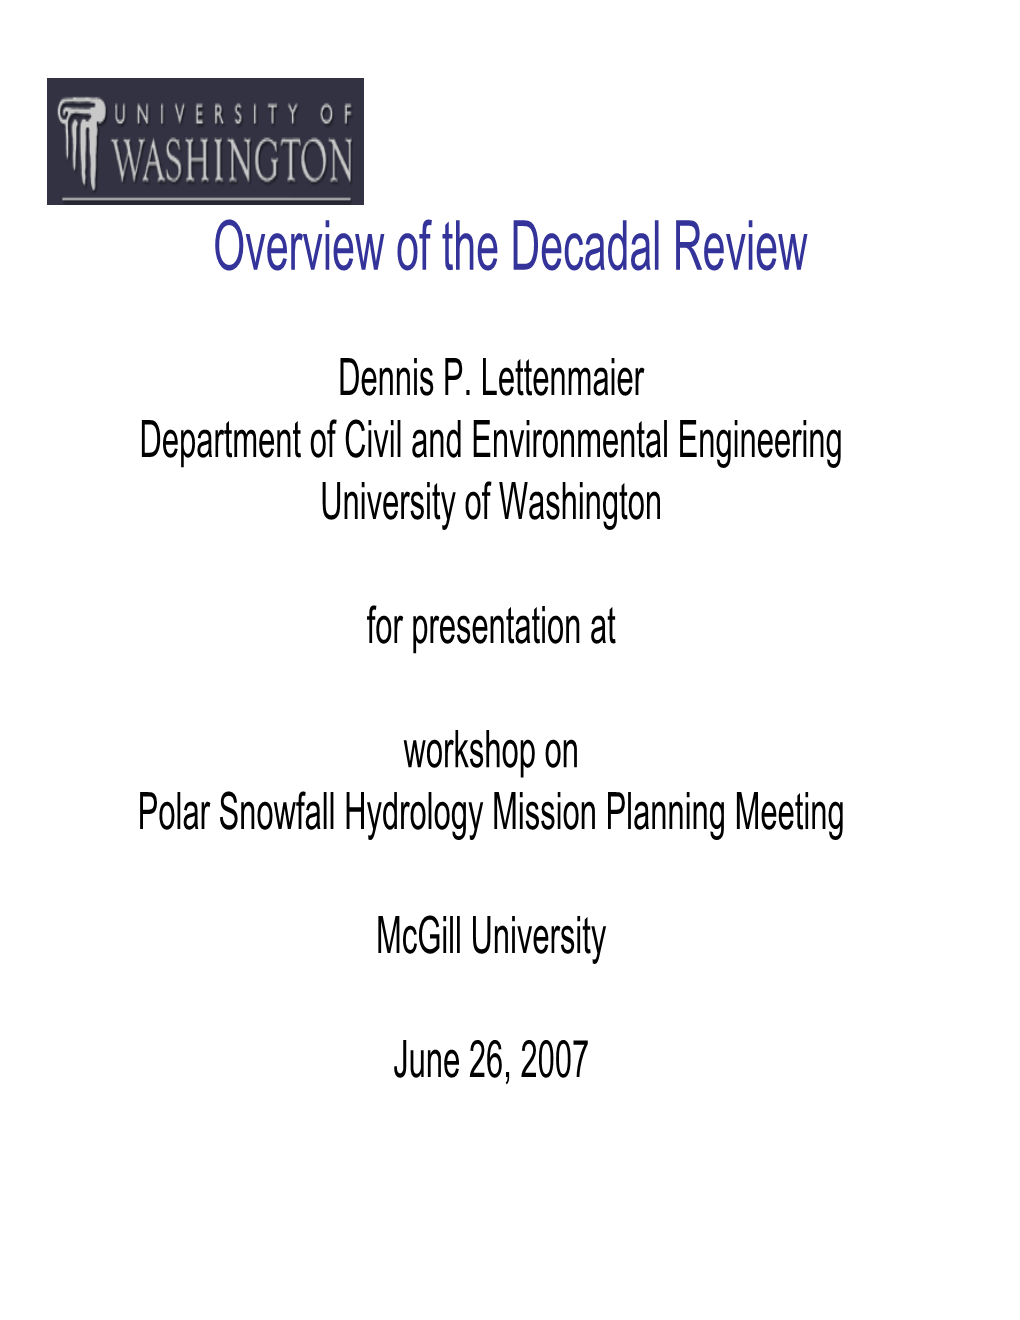 Overview of the Decadal Review